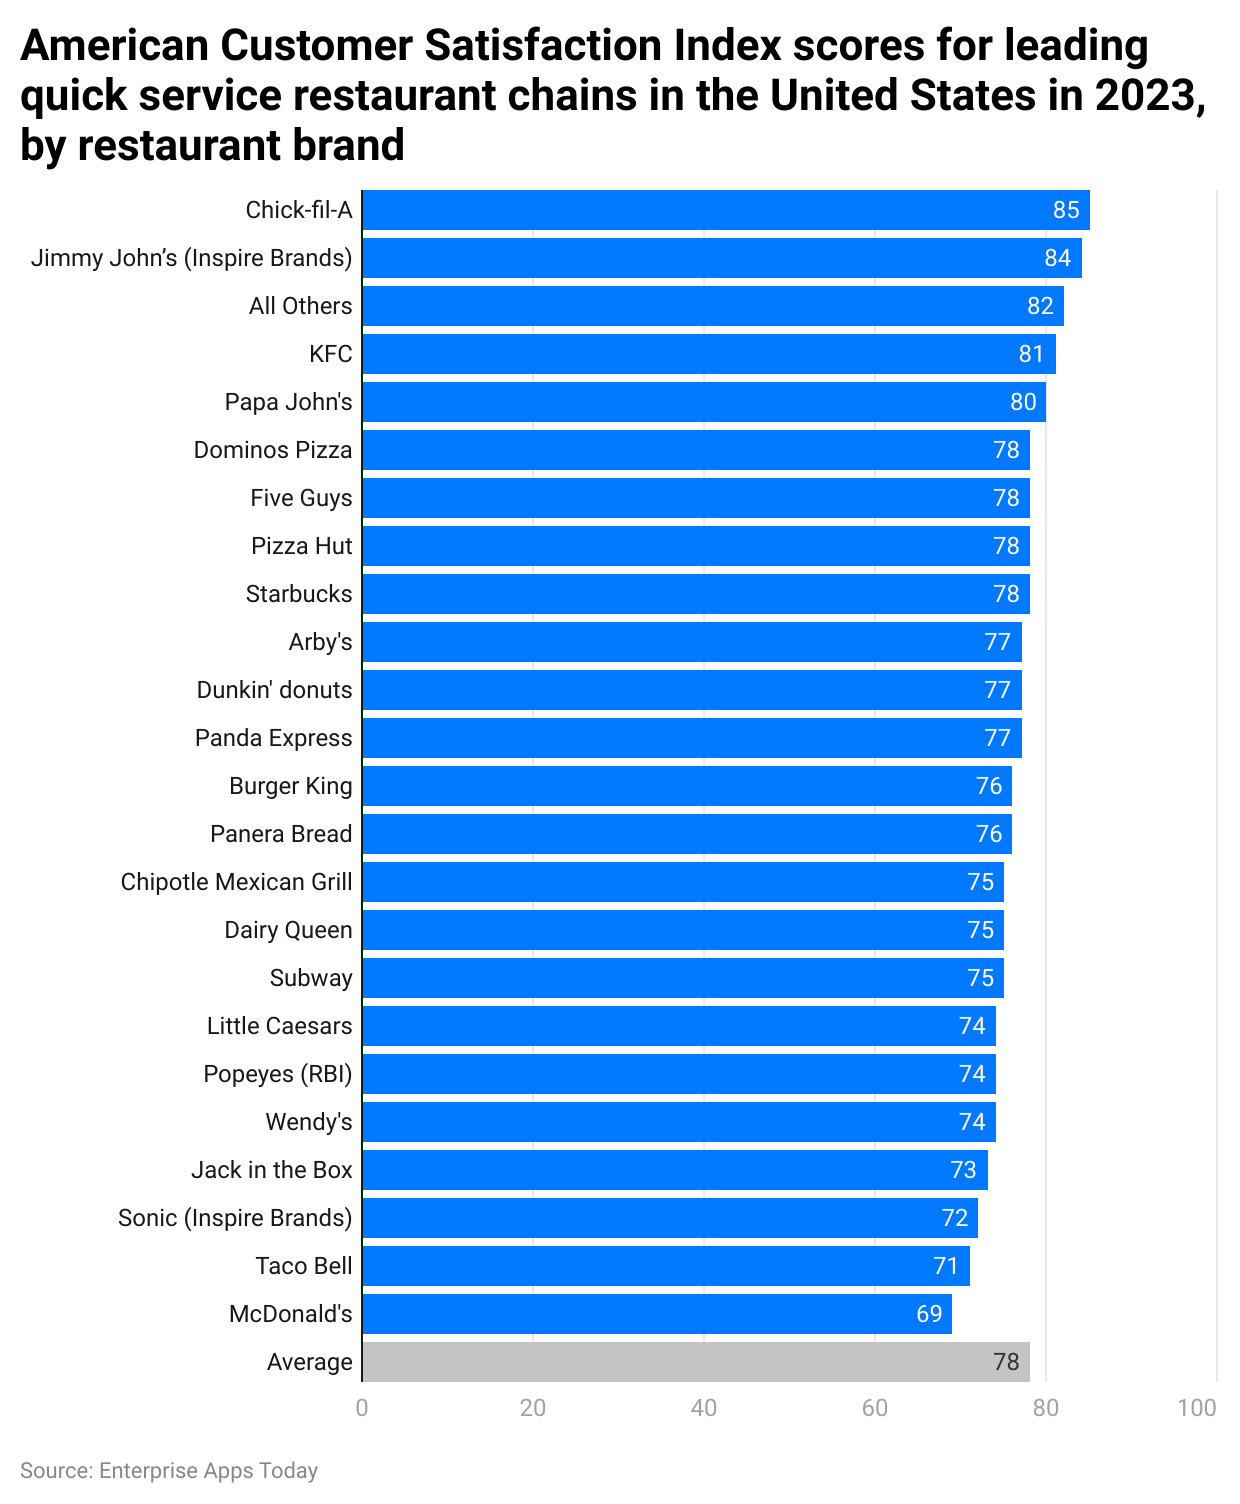 american-customer-satisfaction-index-scores-for-leading-quick-service-restaurant-chains-in-the-united-states-in-2023-by-restaurant-brand